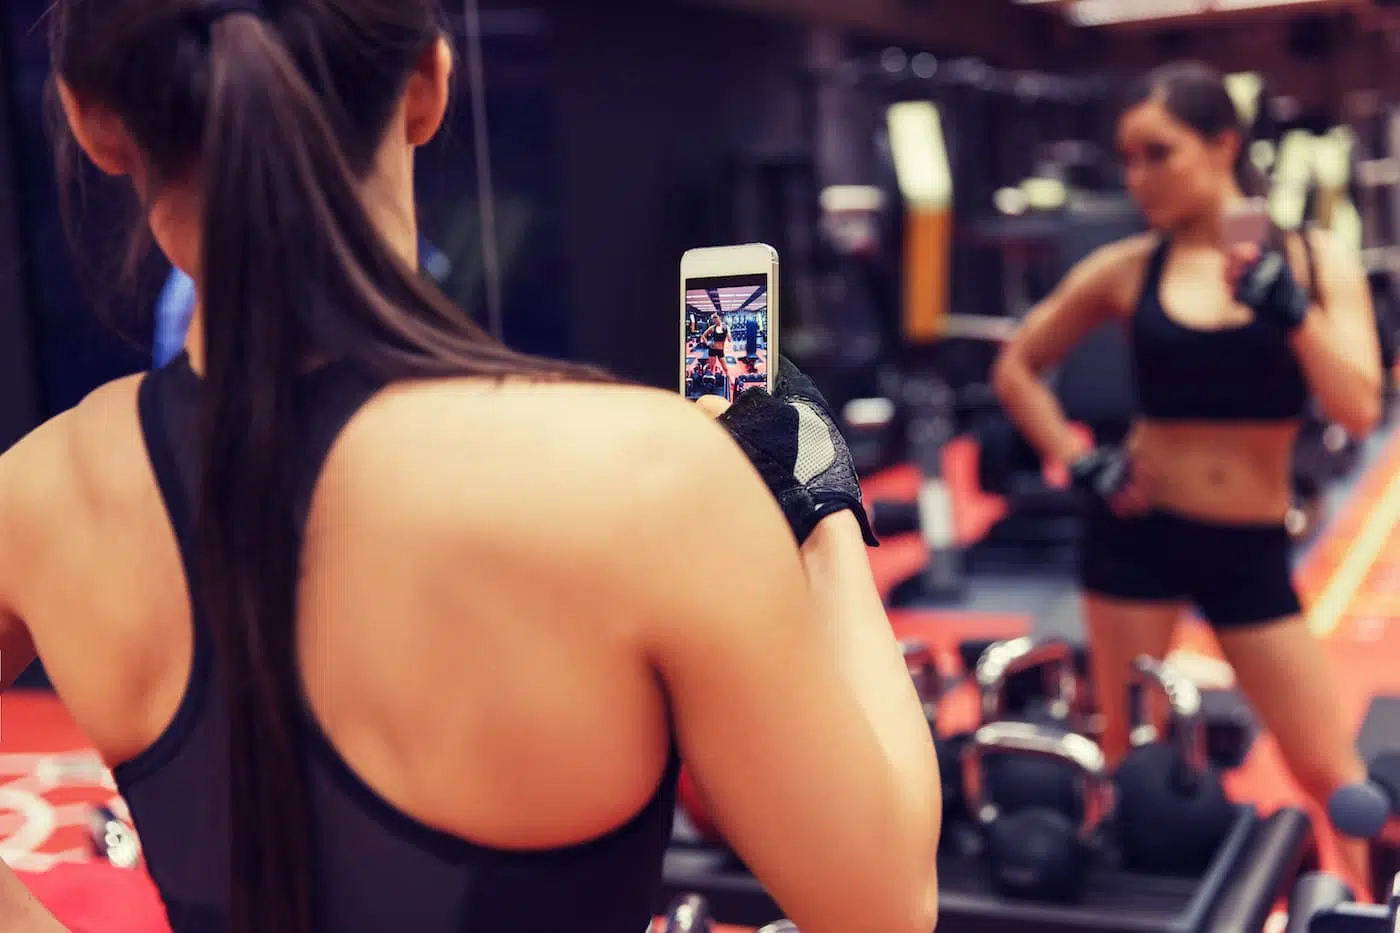 Fitness infuencer takes photo in mirror